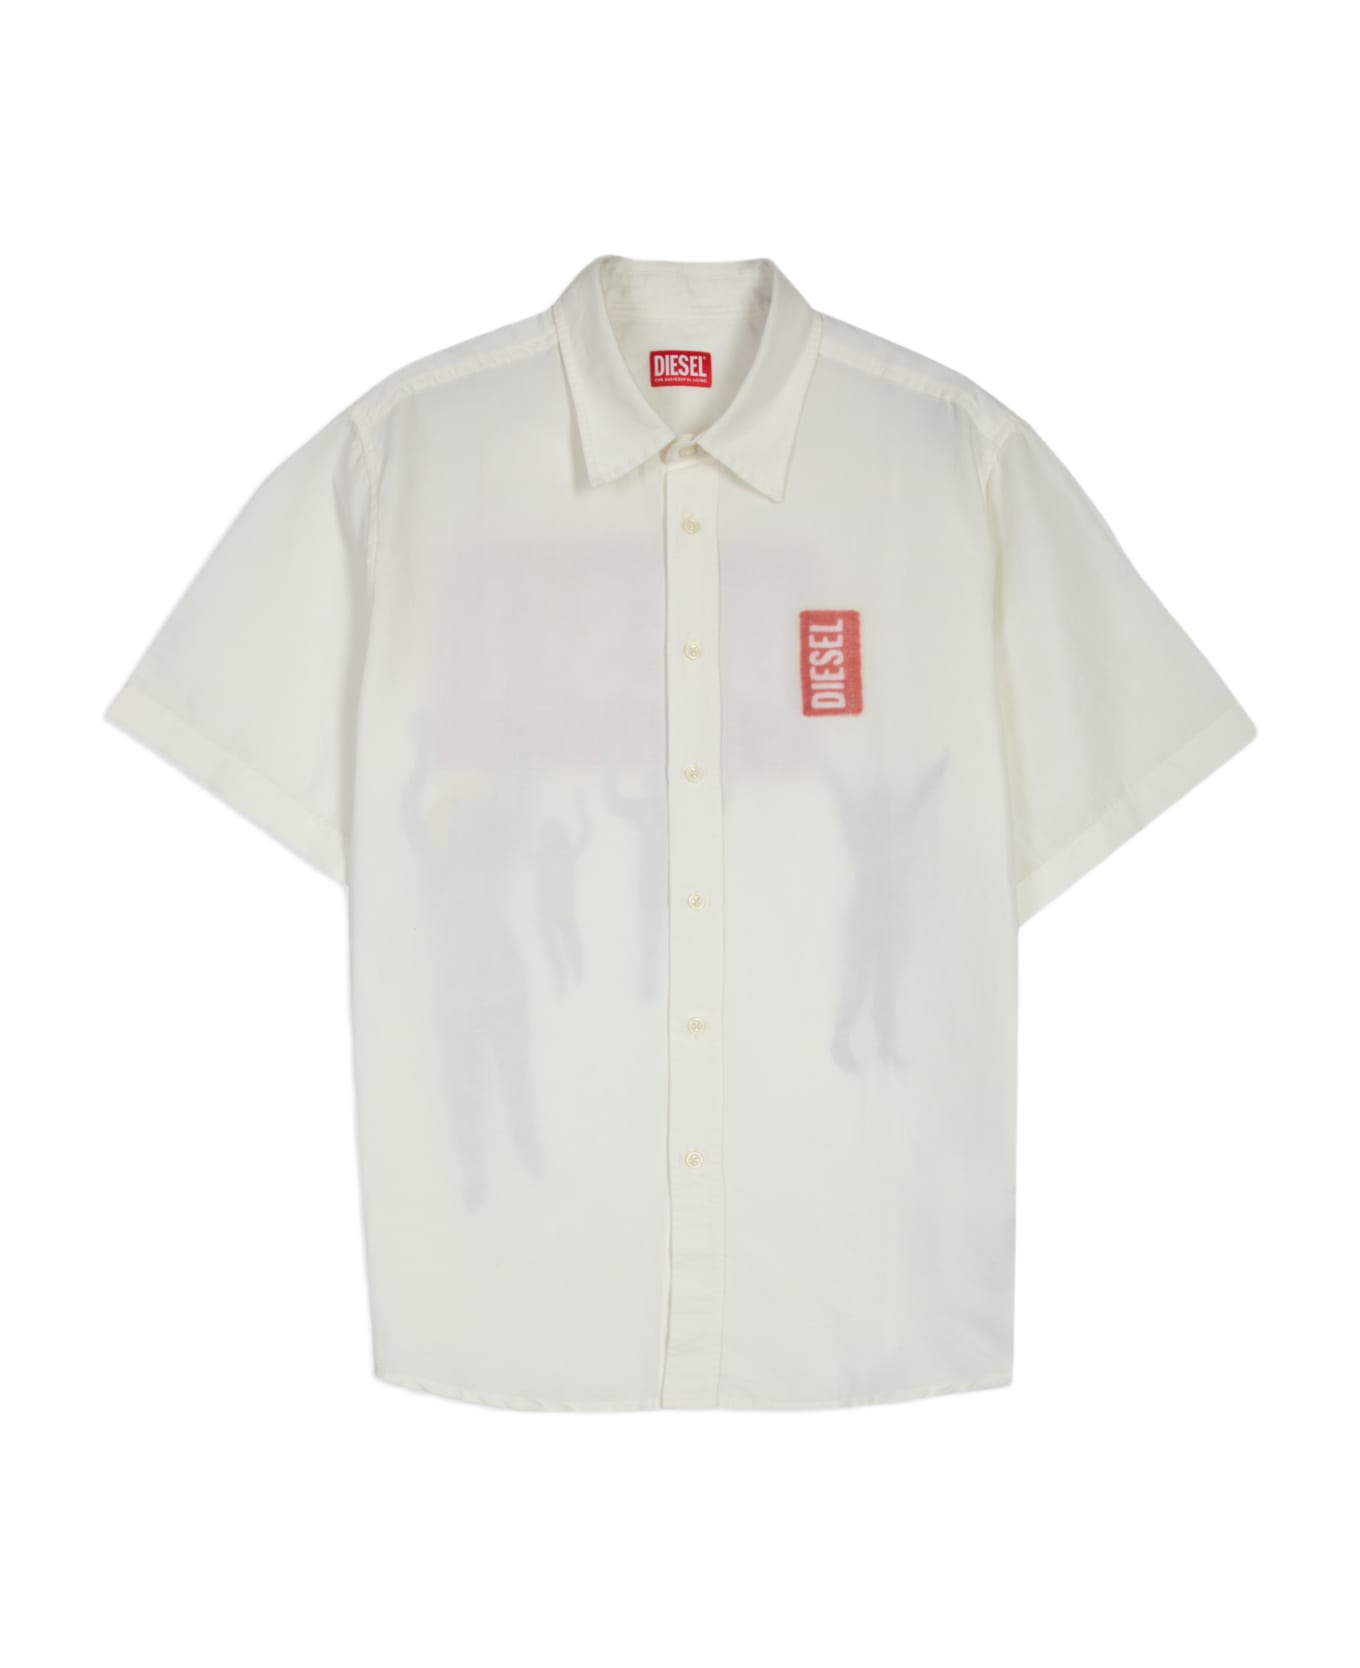 Diesel S-elias-a White linen blend shirt with short sleeves and digital print - S Elias A - Bianco